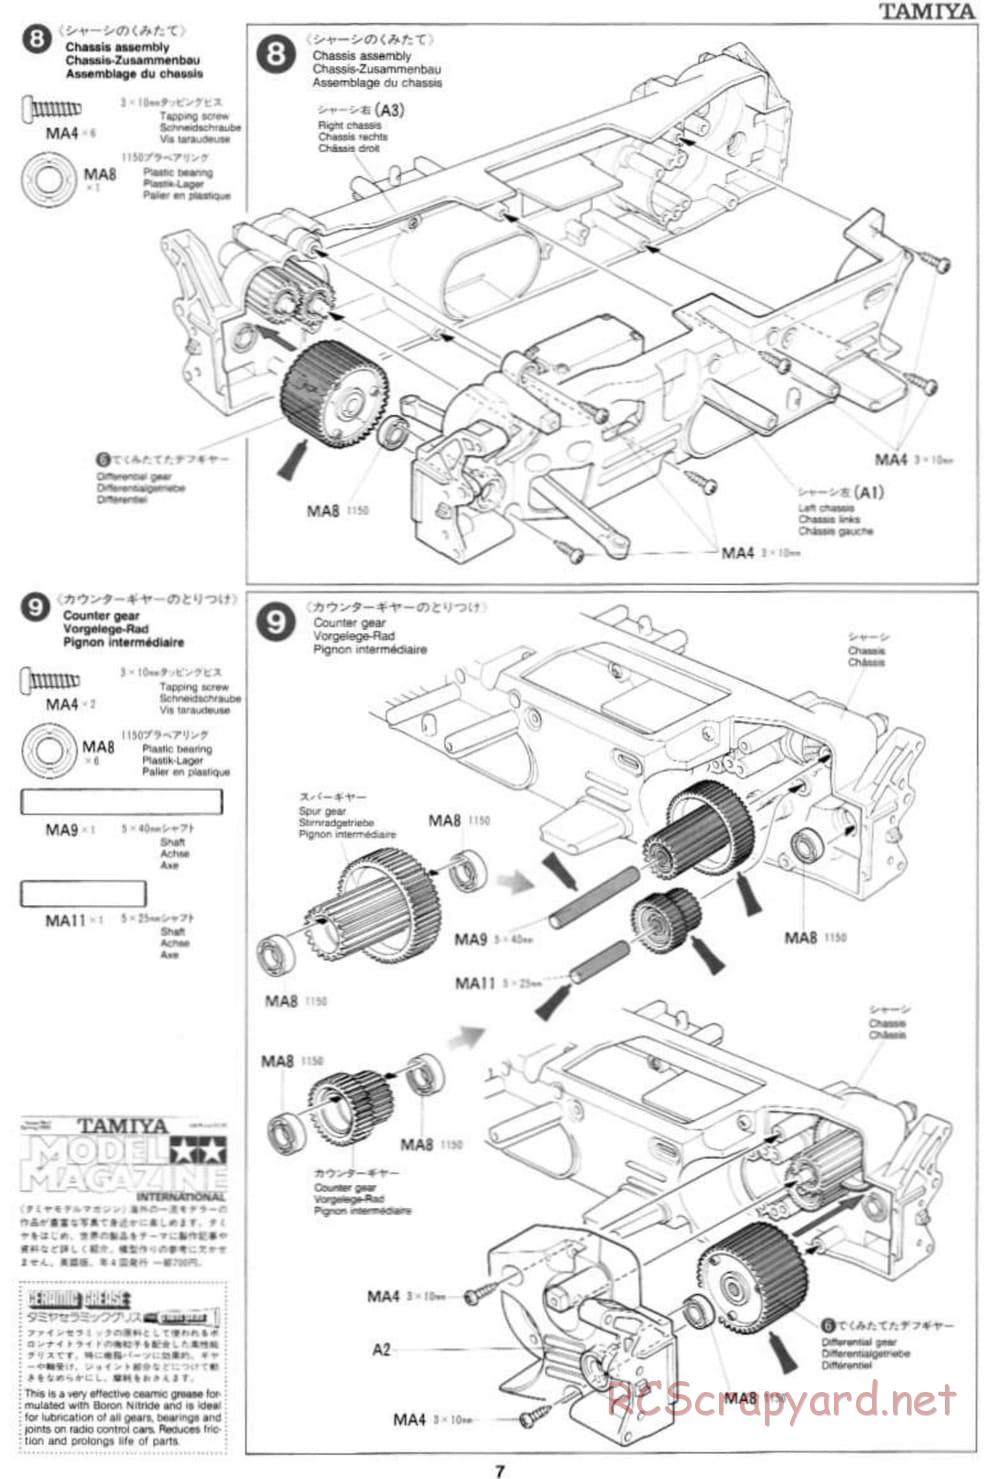 Tamiya - Toyota Celica GT-Four 97 Monte Carlo - TL-01 Chassis - Manual - Page 7